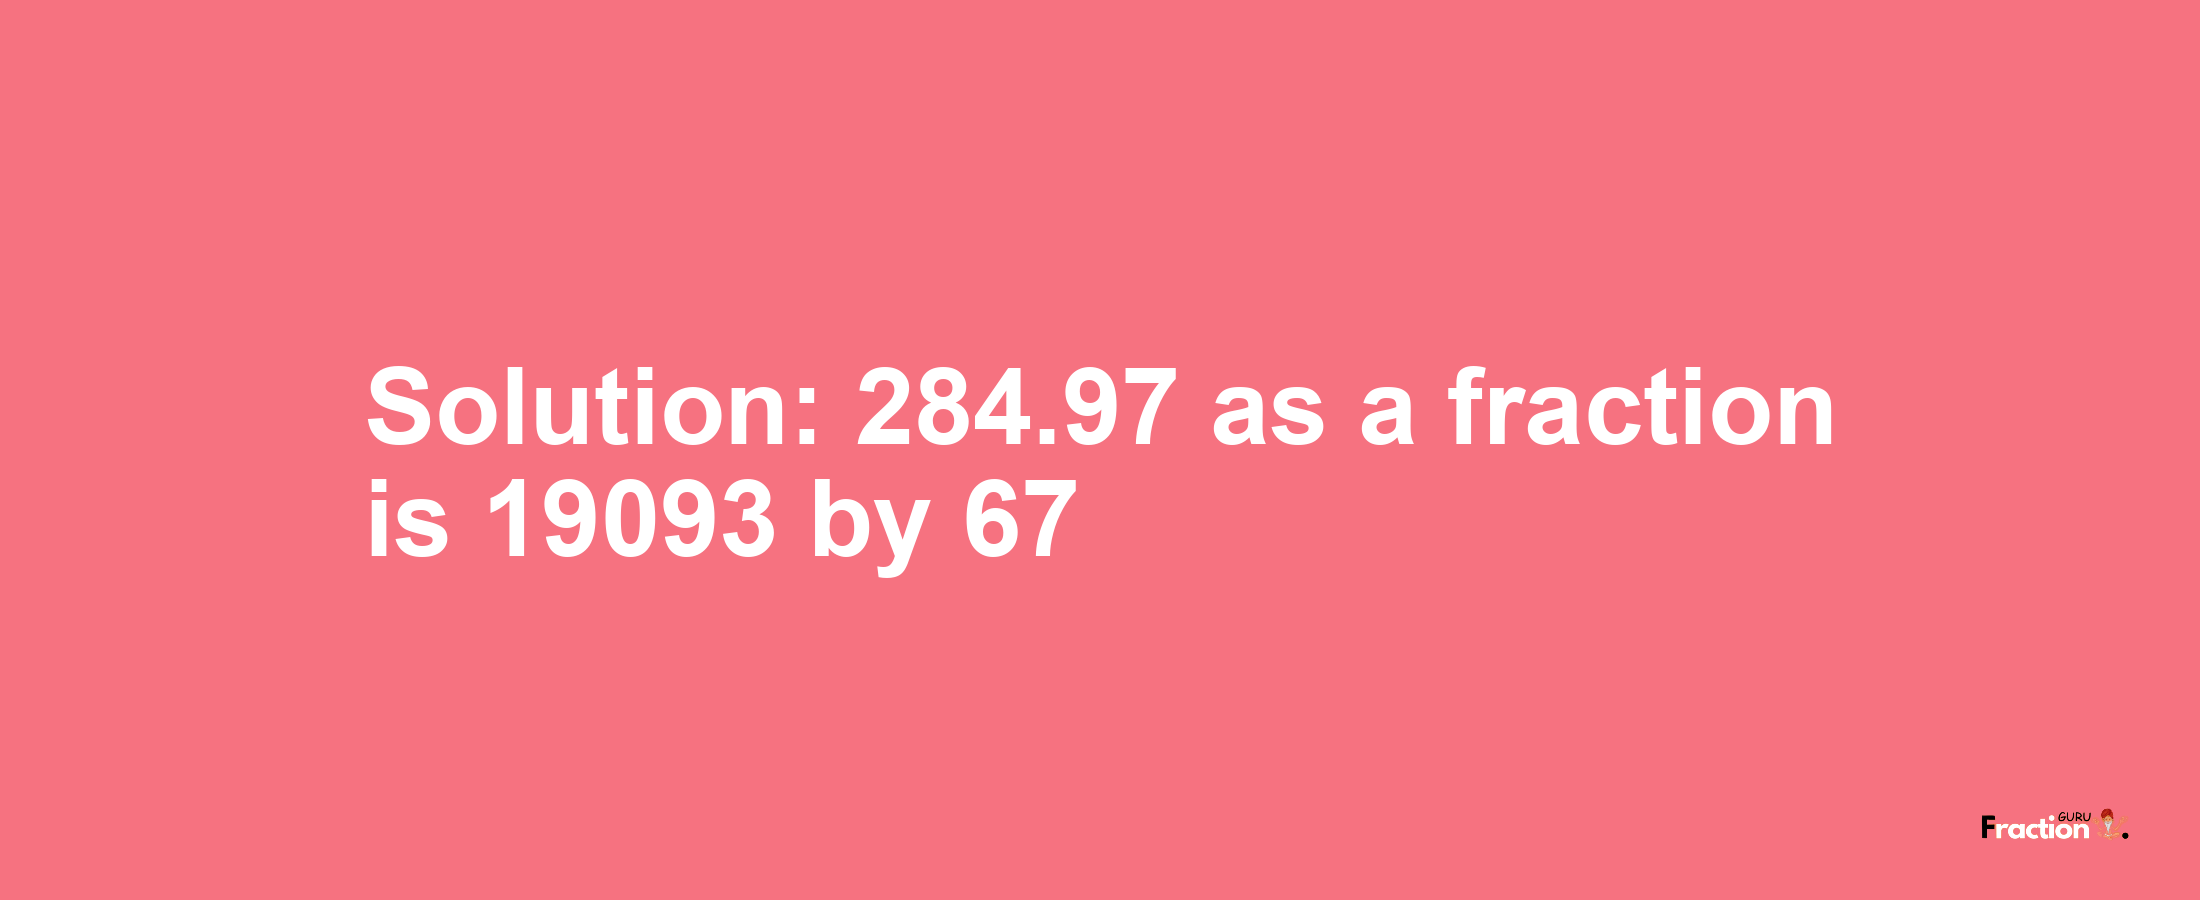 Solution:284.97 as a fraction is 19093/67